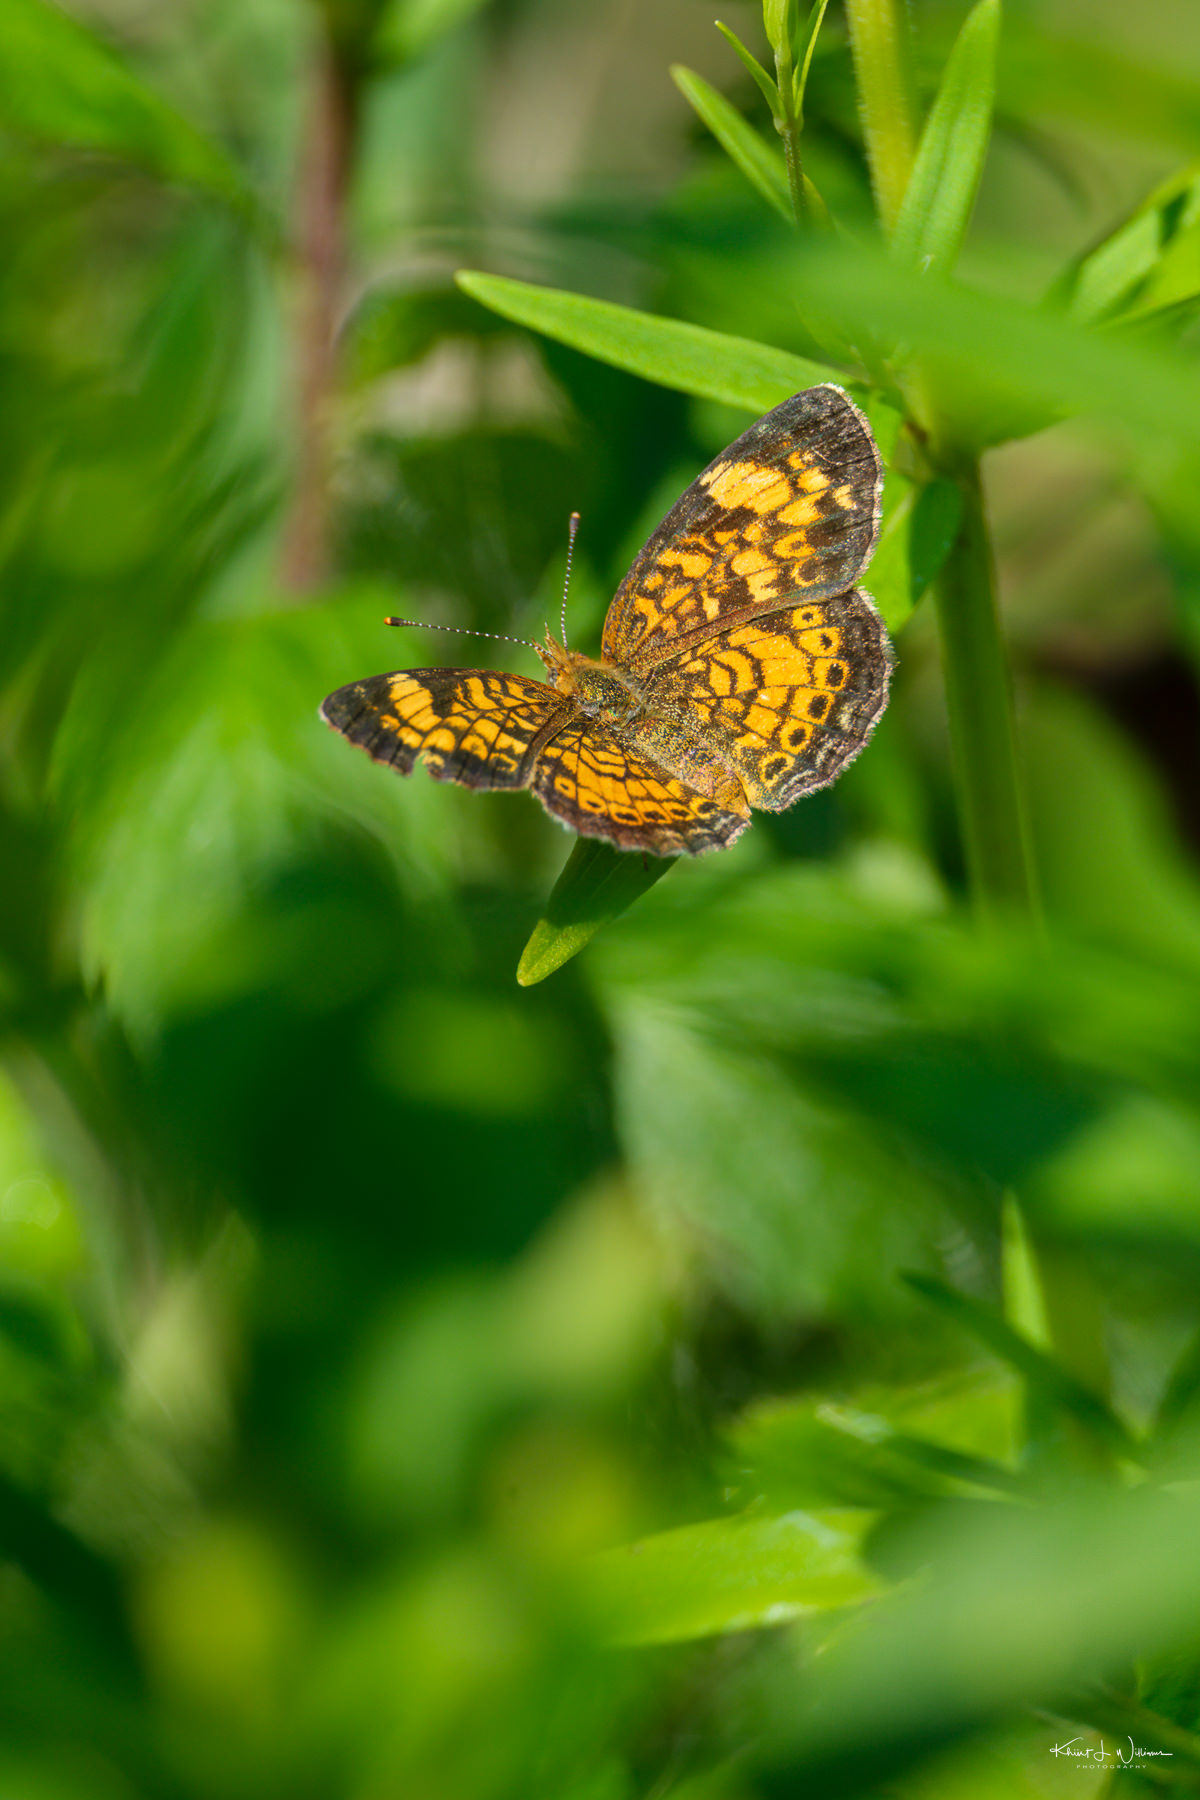 In the Company of the Pearl Crescent Butterfly